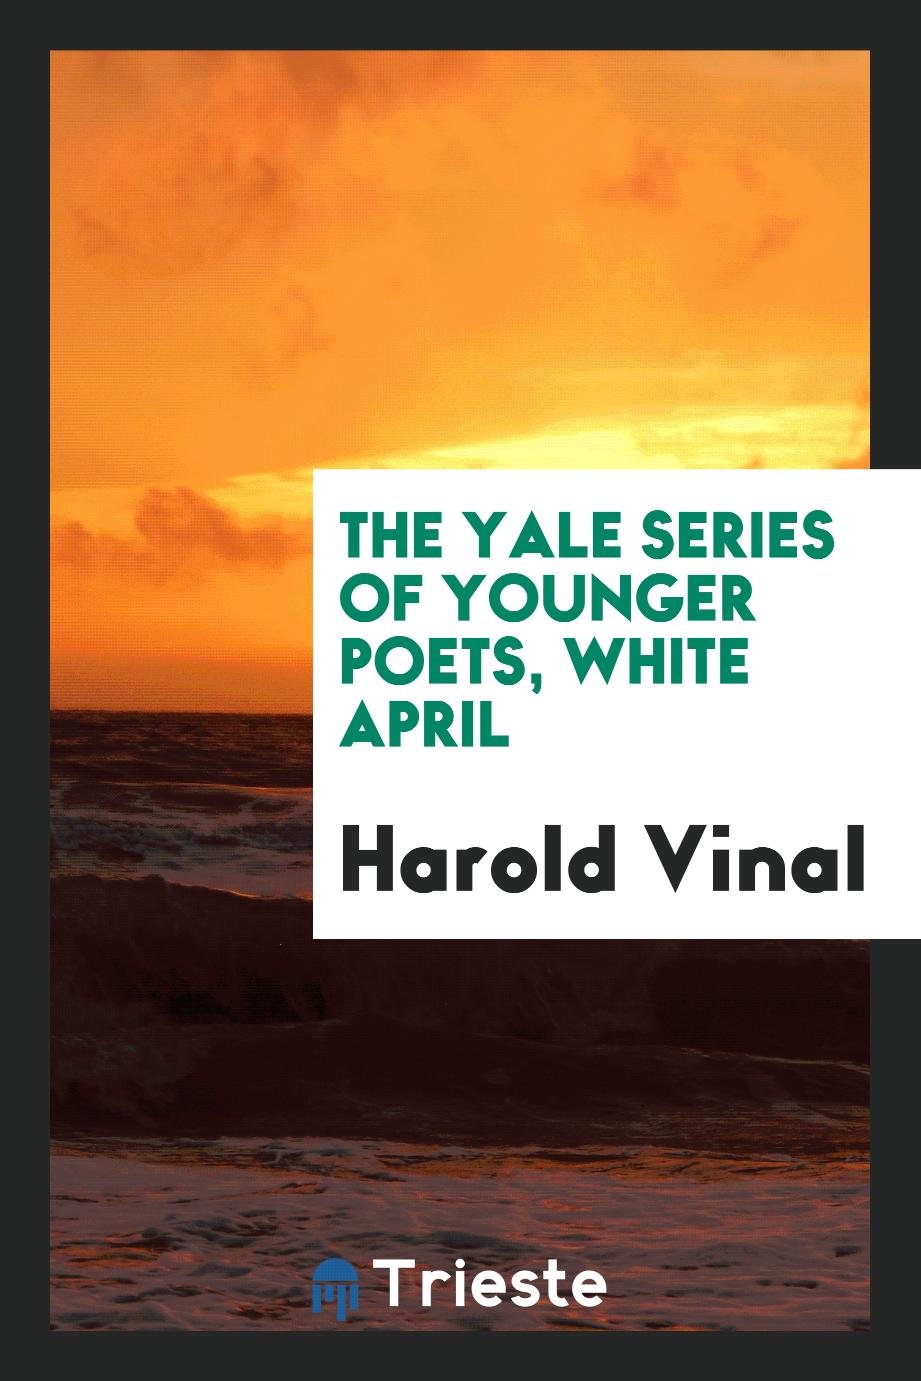 The Yale Series of Younger poets, White April